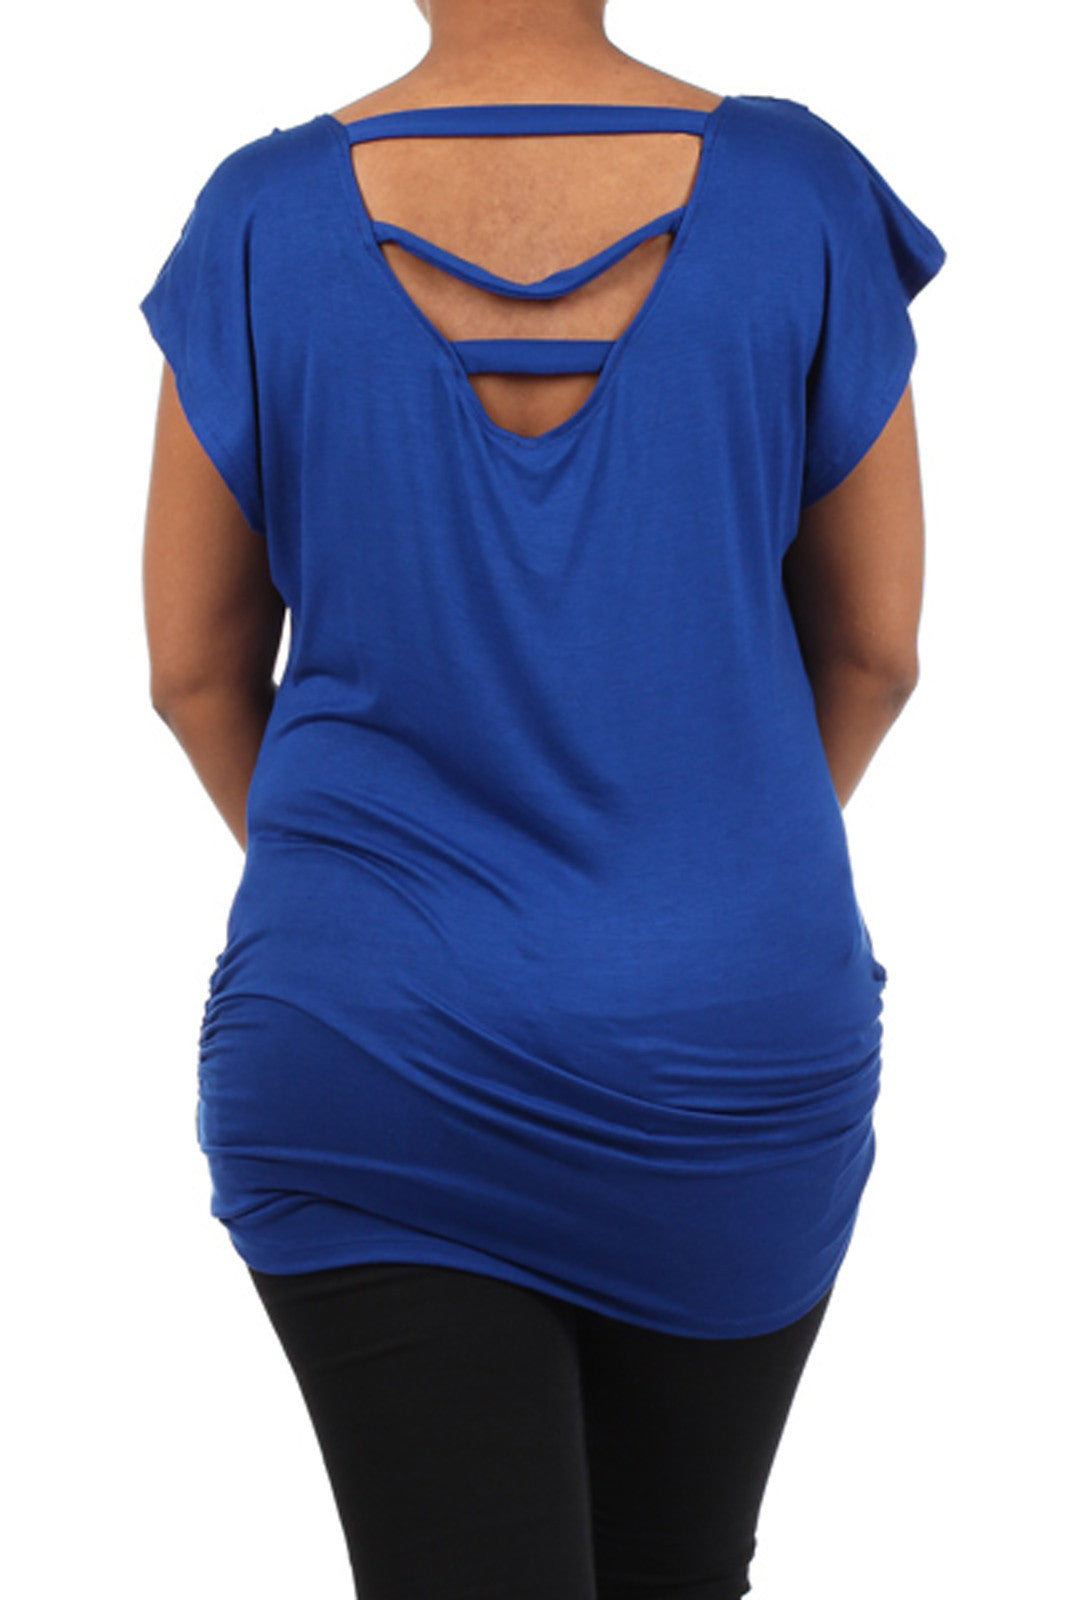 Maternity Top - Mommylicious